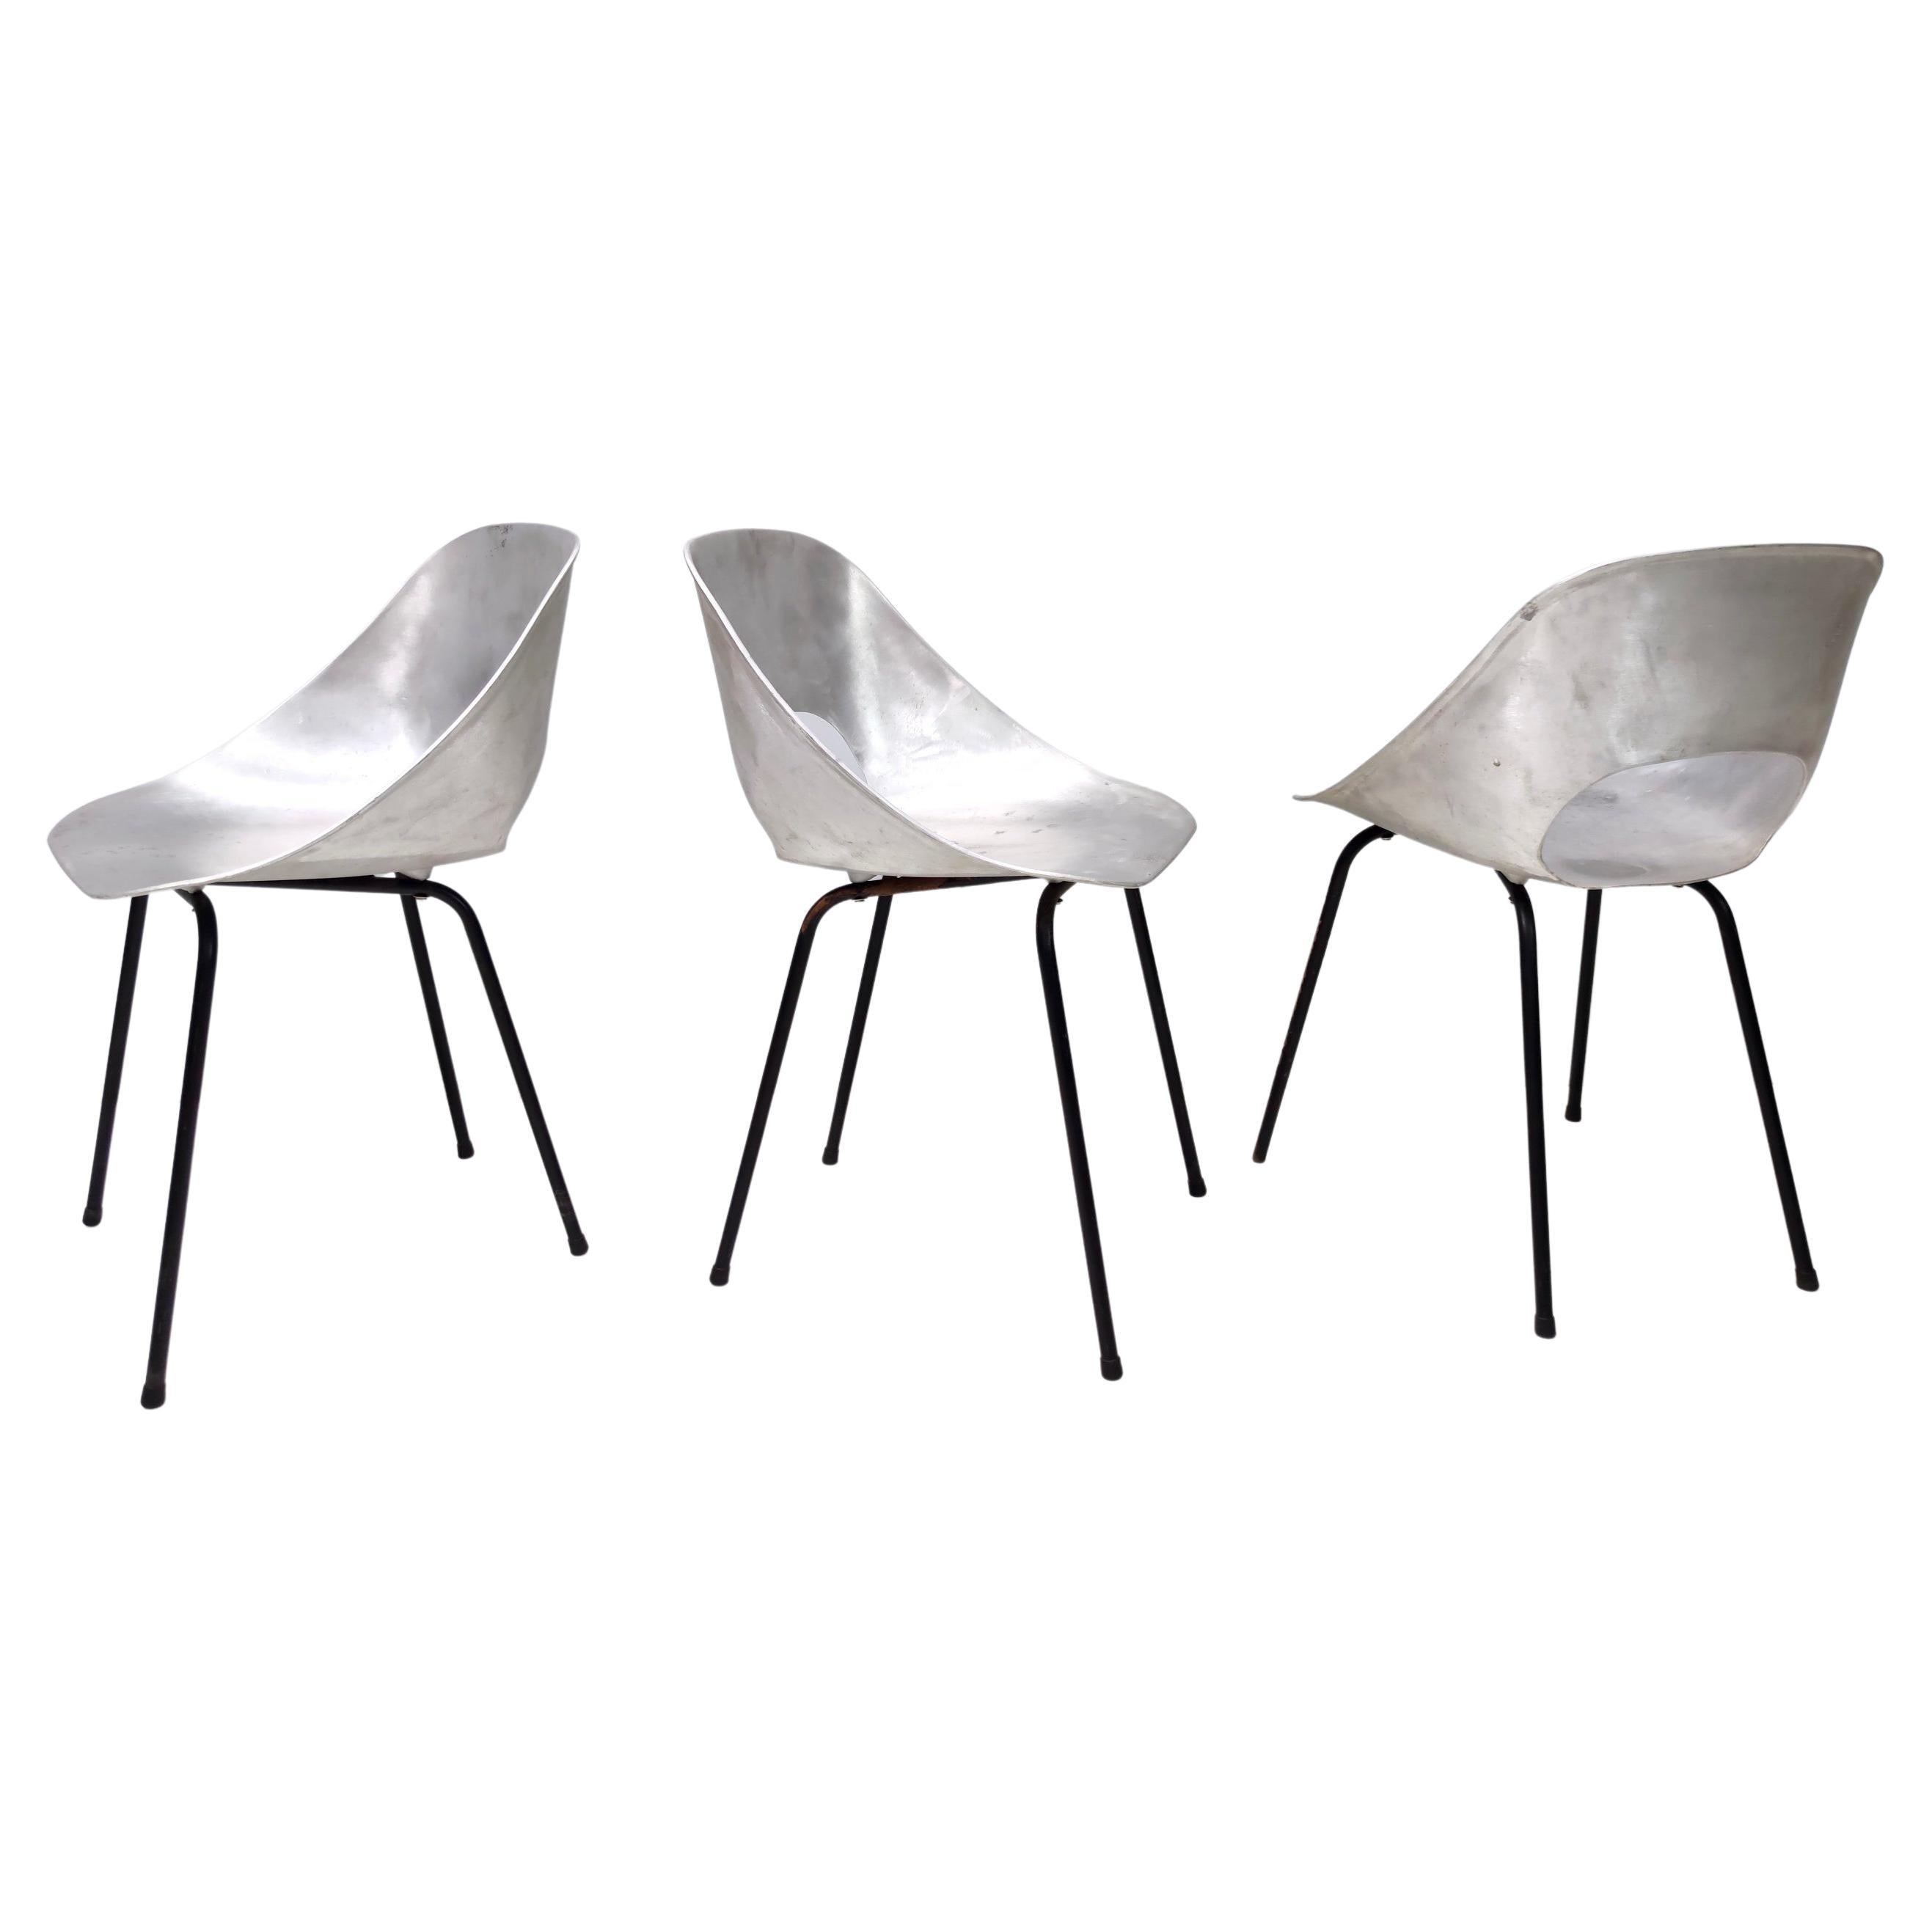 Set of Three Aluminum "Tulipe" Tonneu Chairs by Pierre Guariche, France